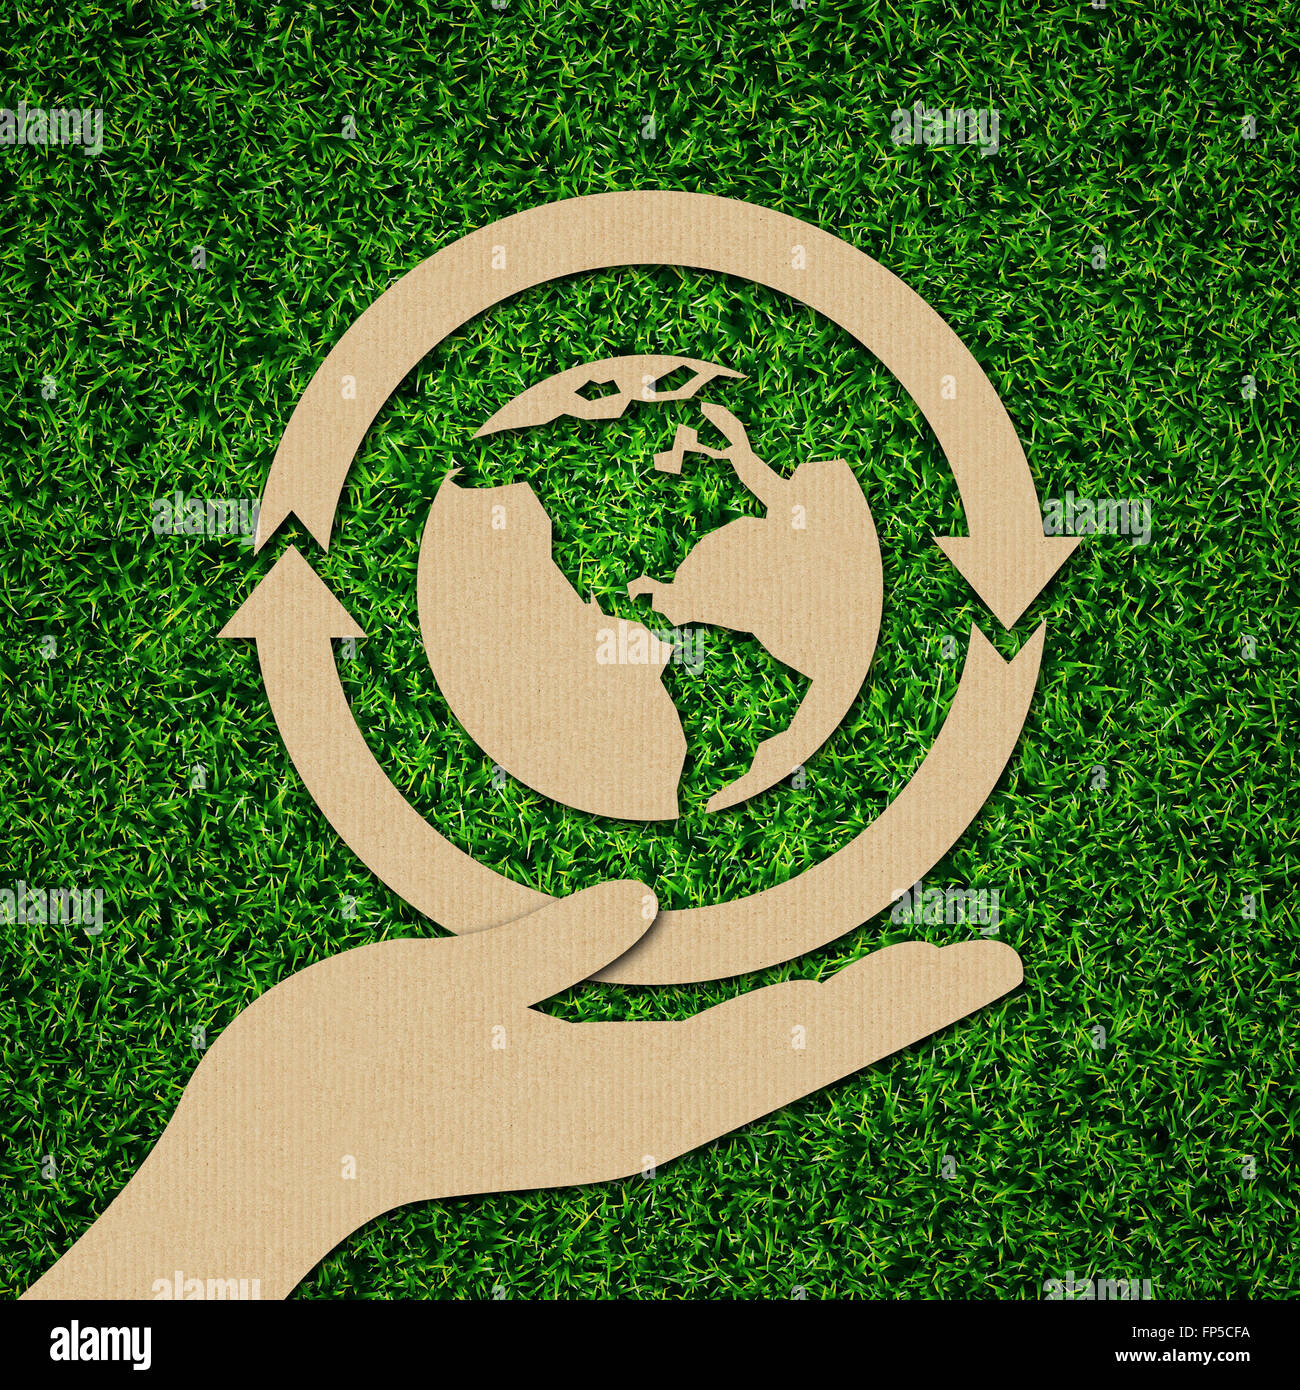 Renewable, sustainable, recycle, and green energy iconic concept on green grass. Stock Photo